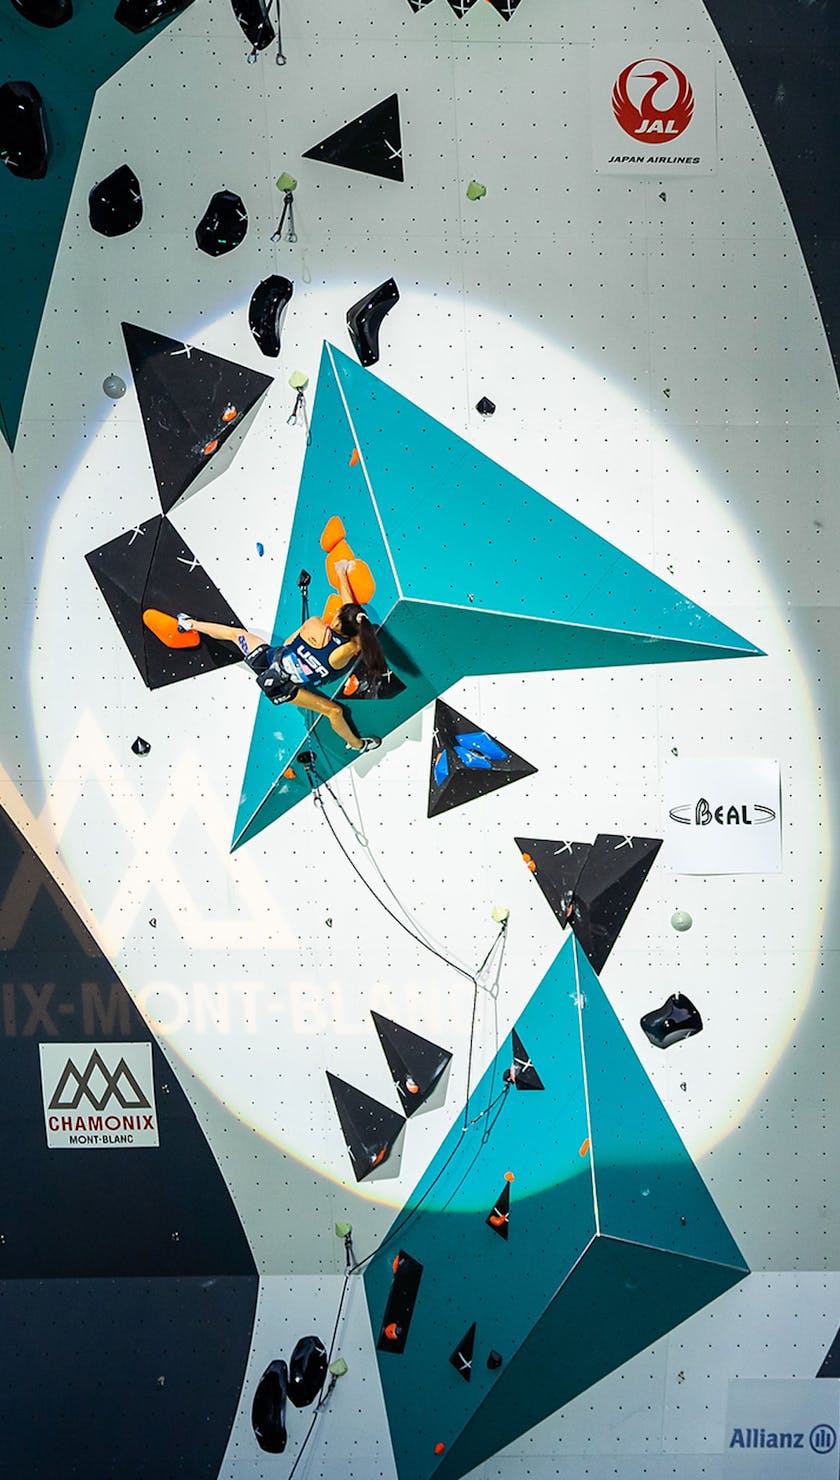 Forged For Gold. Black Diamond athlete Natalia Grossman climbing in a world Cup competition. 